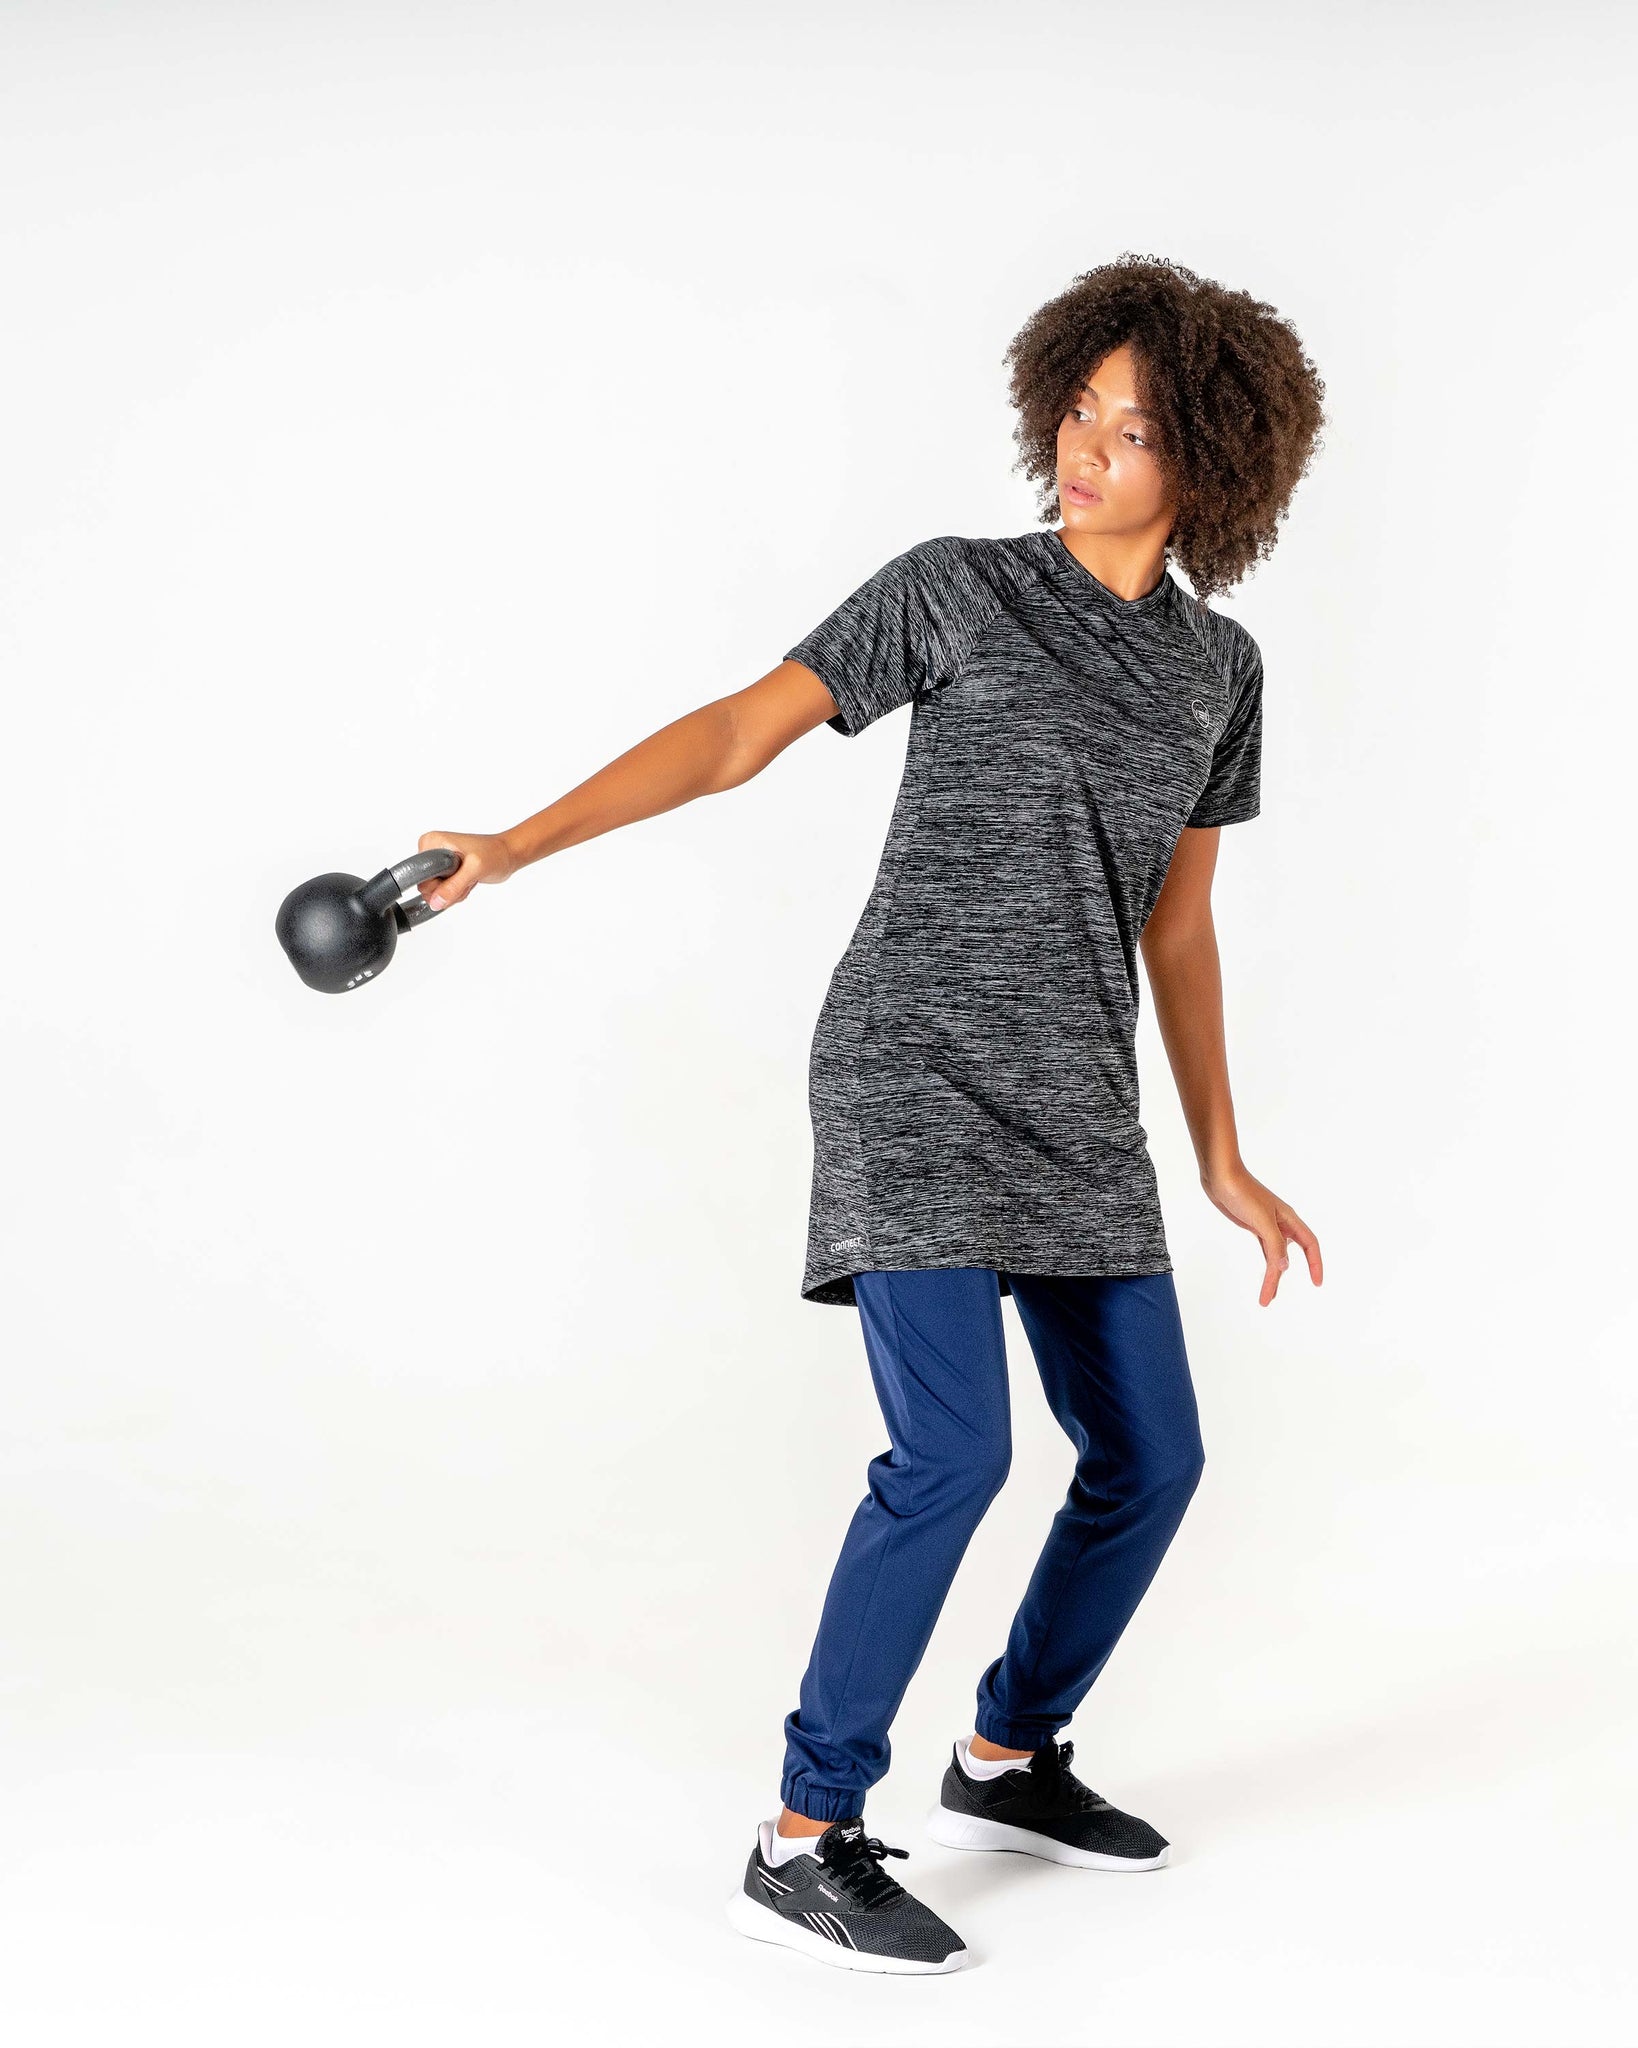 Connect T-Shirt Dress in Black by Veil Garments. Modest activewear collection.